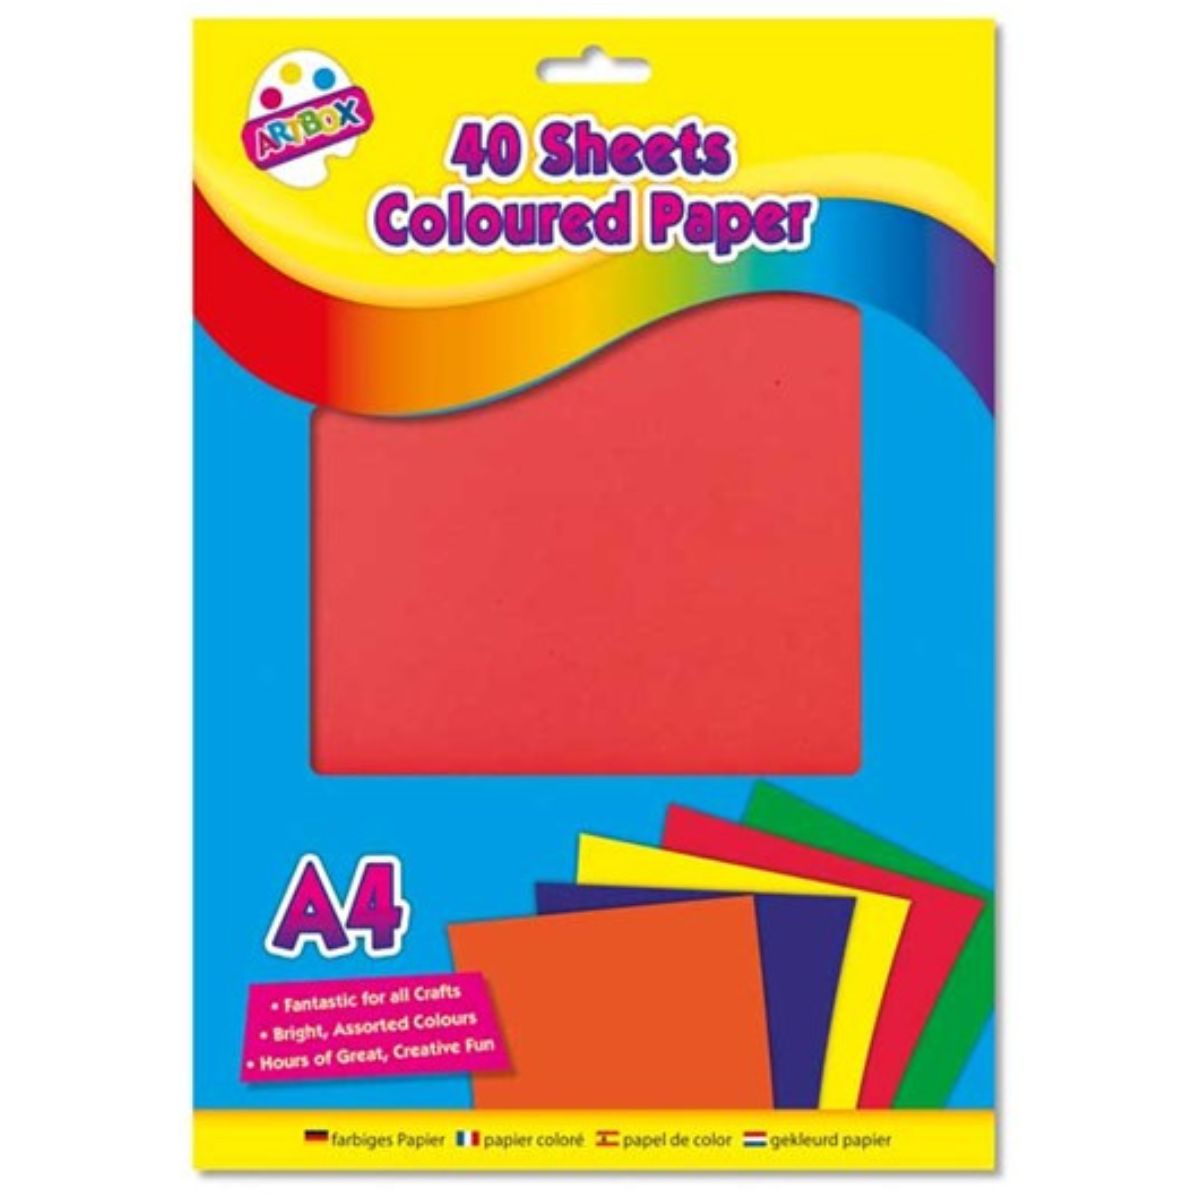 40 Sheets A4 Coloured Paper